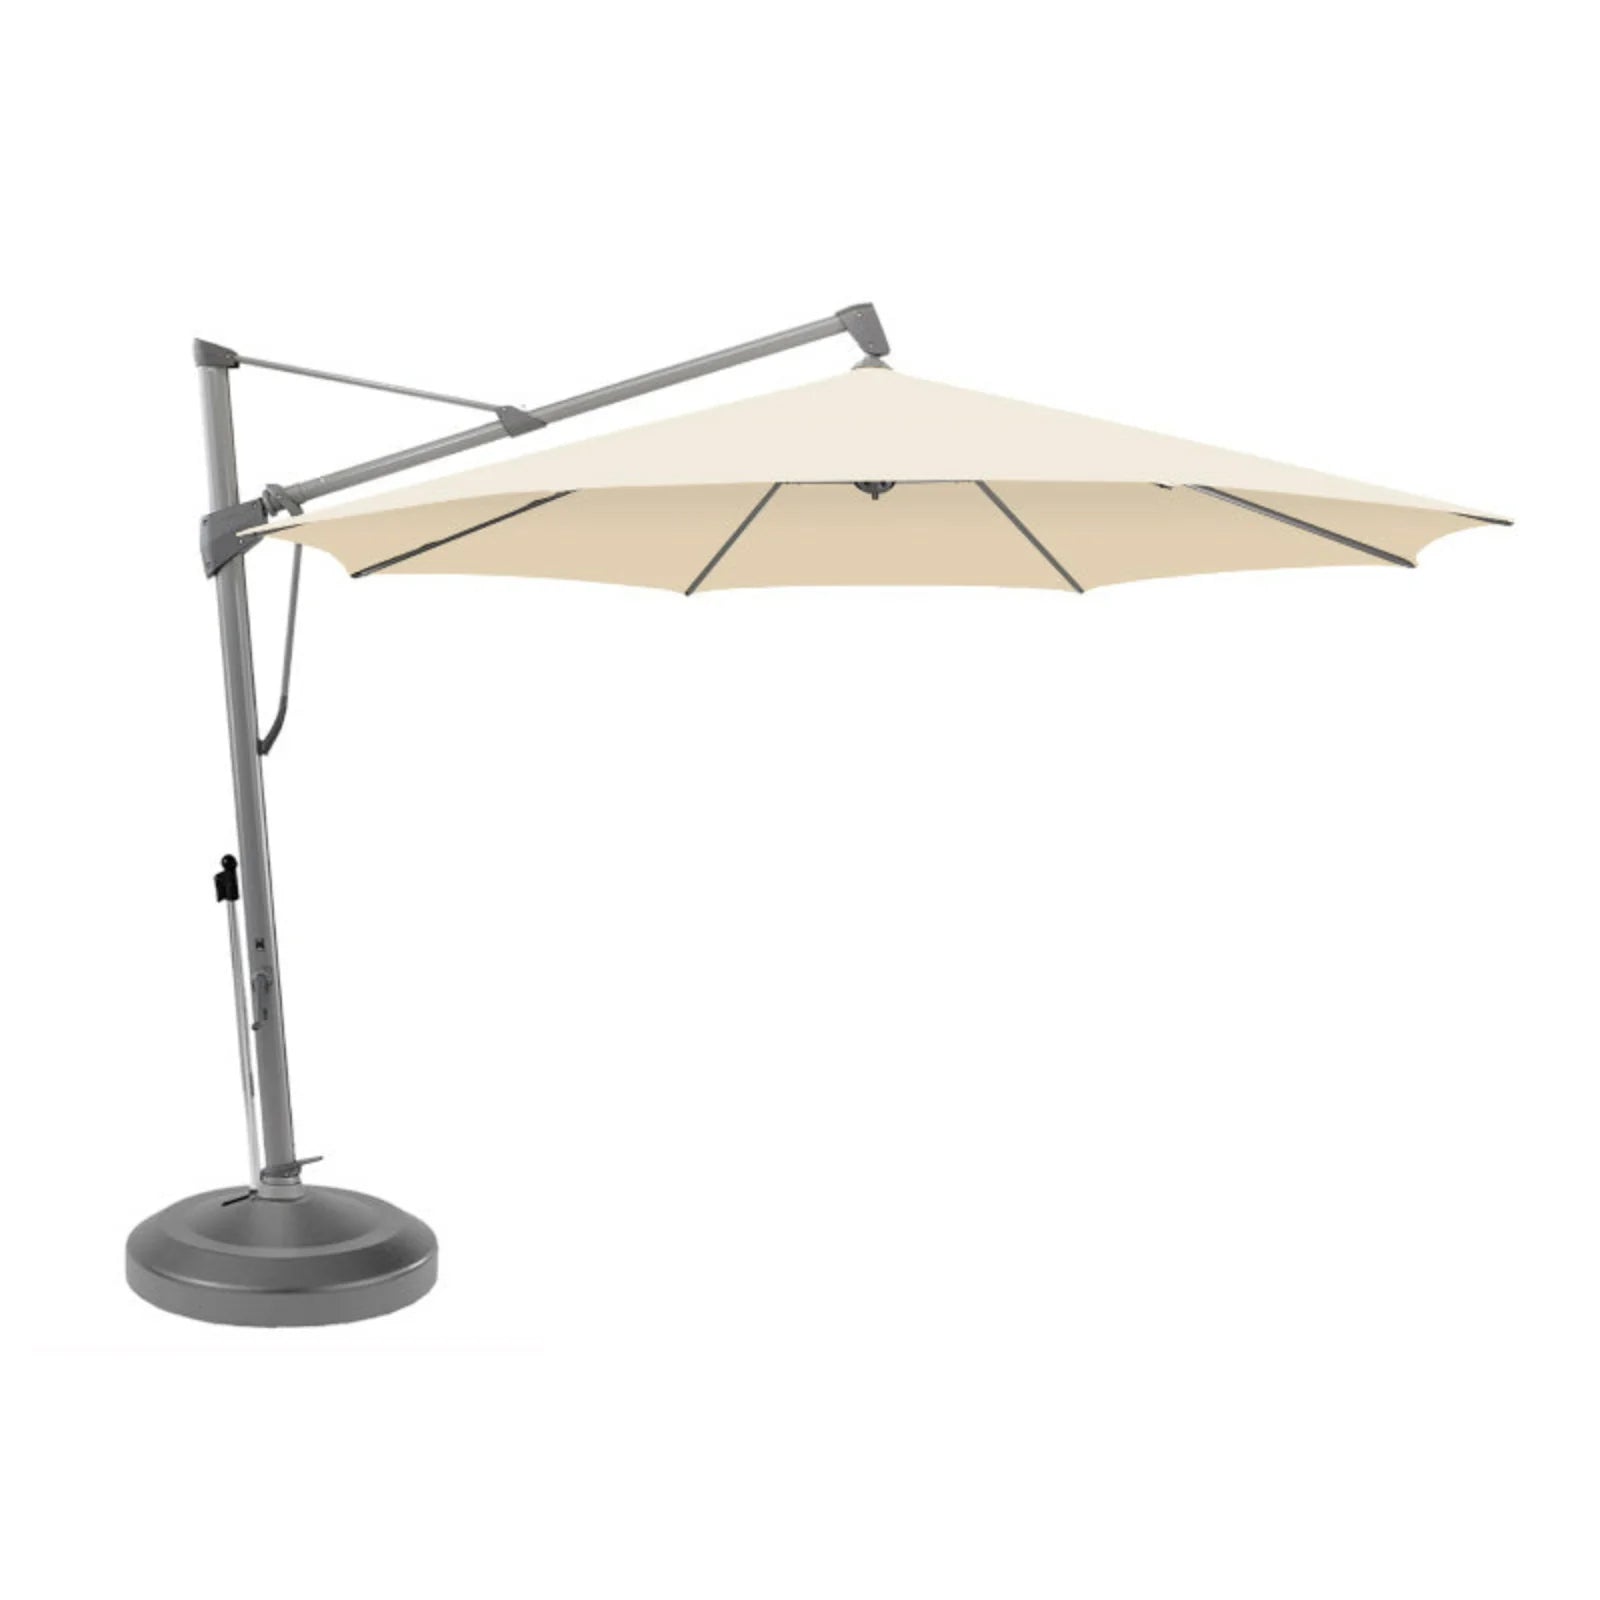 Sombrano 4m Round Natural Canopy With Liro Moveable Base